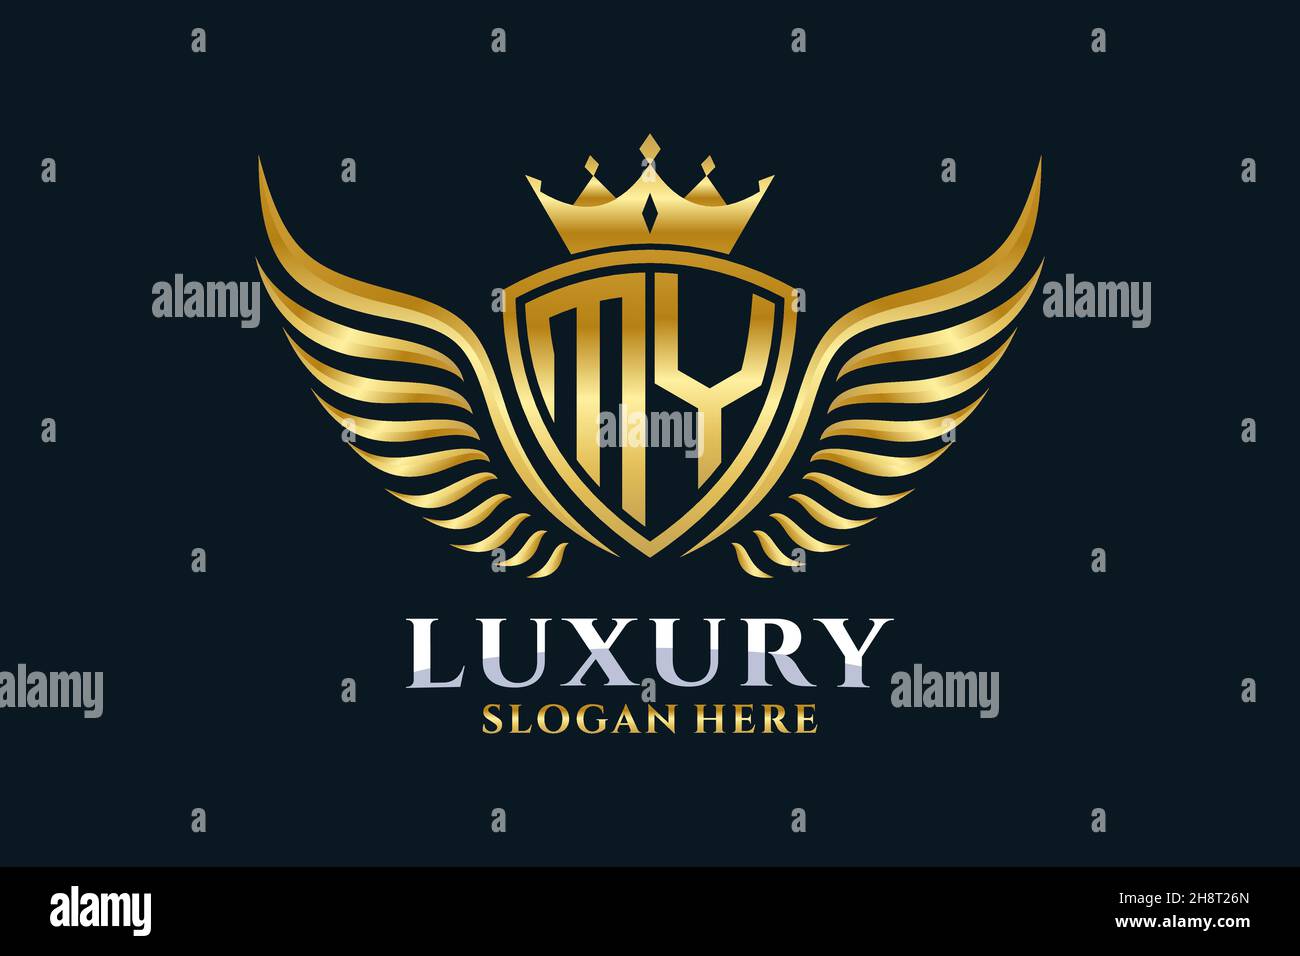 Luxury royal wing Letter MY crest Gold color Logo vector, Victory logo, crest logo, wing logo, vector logo . Stock Vector